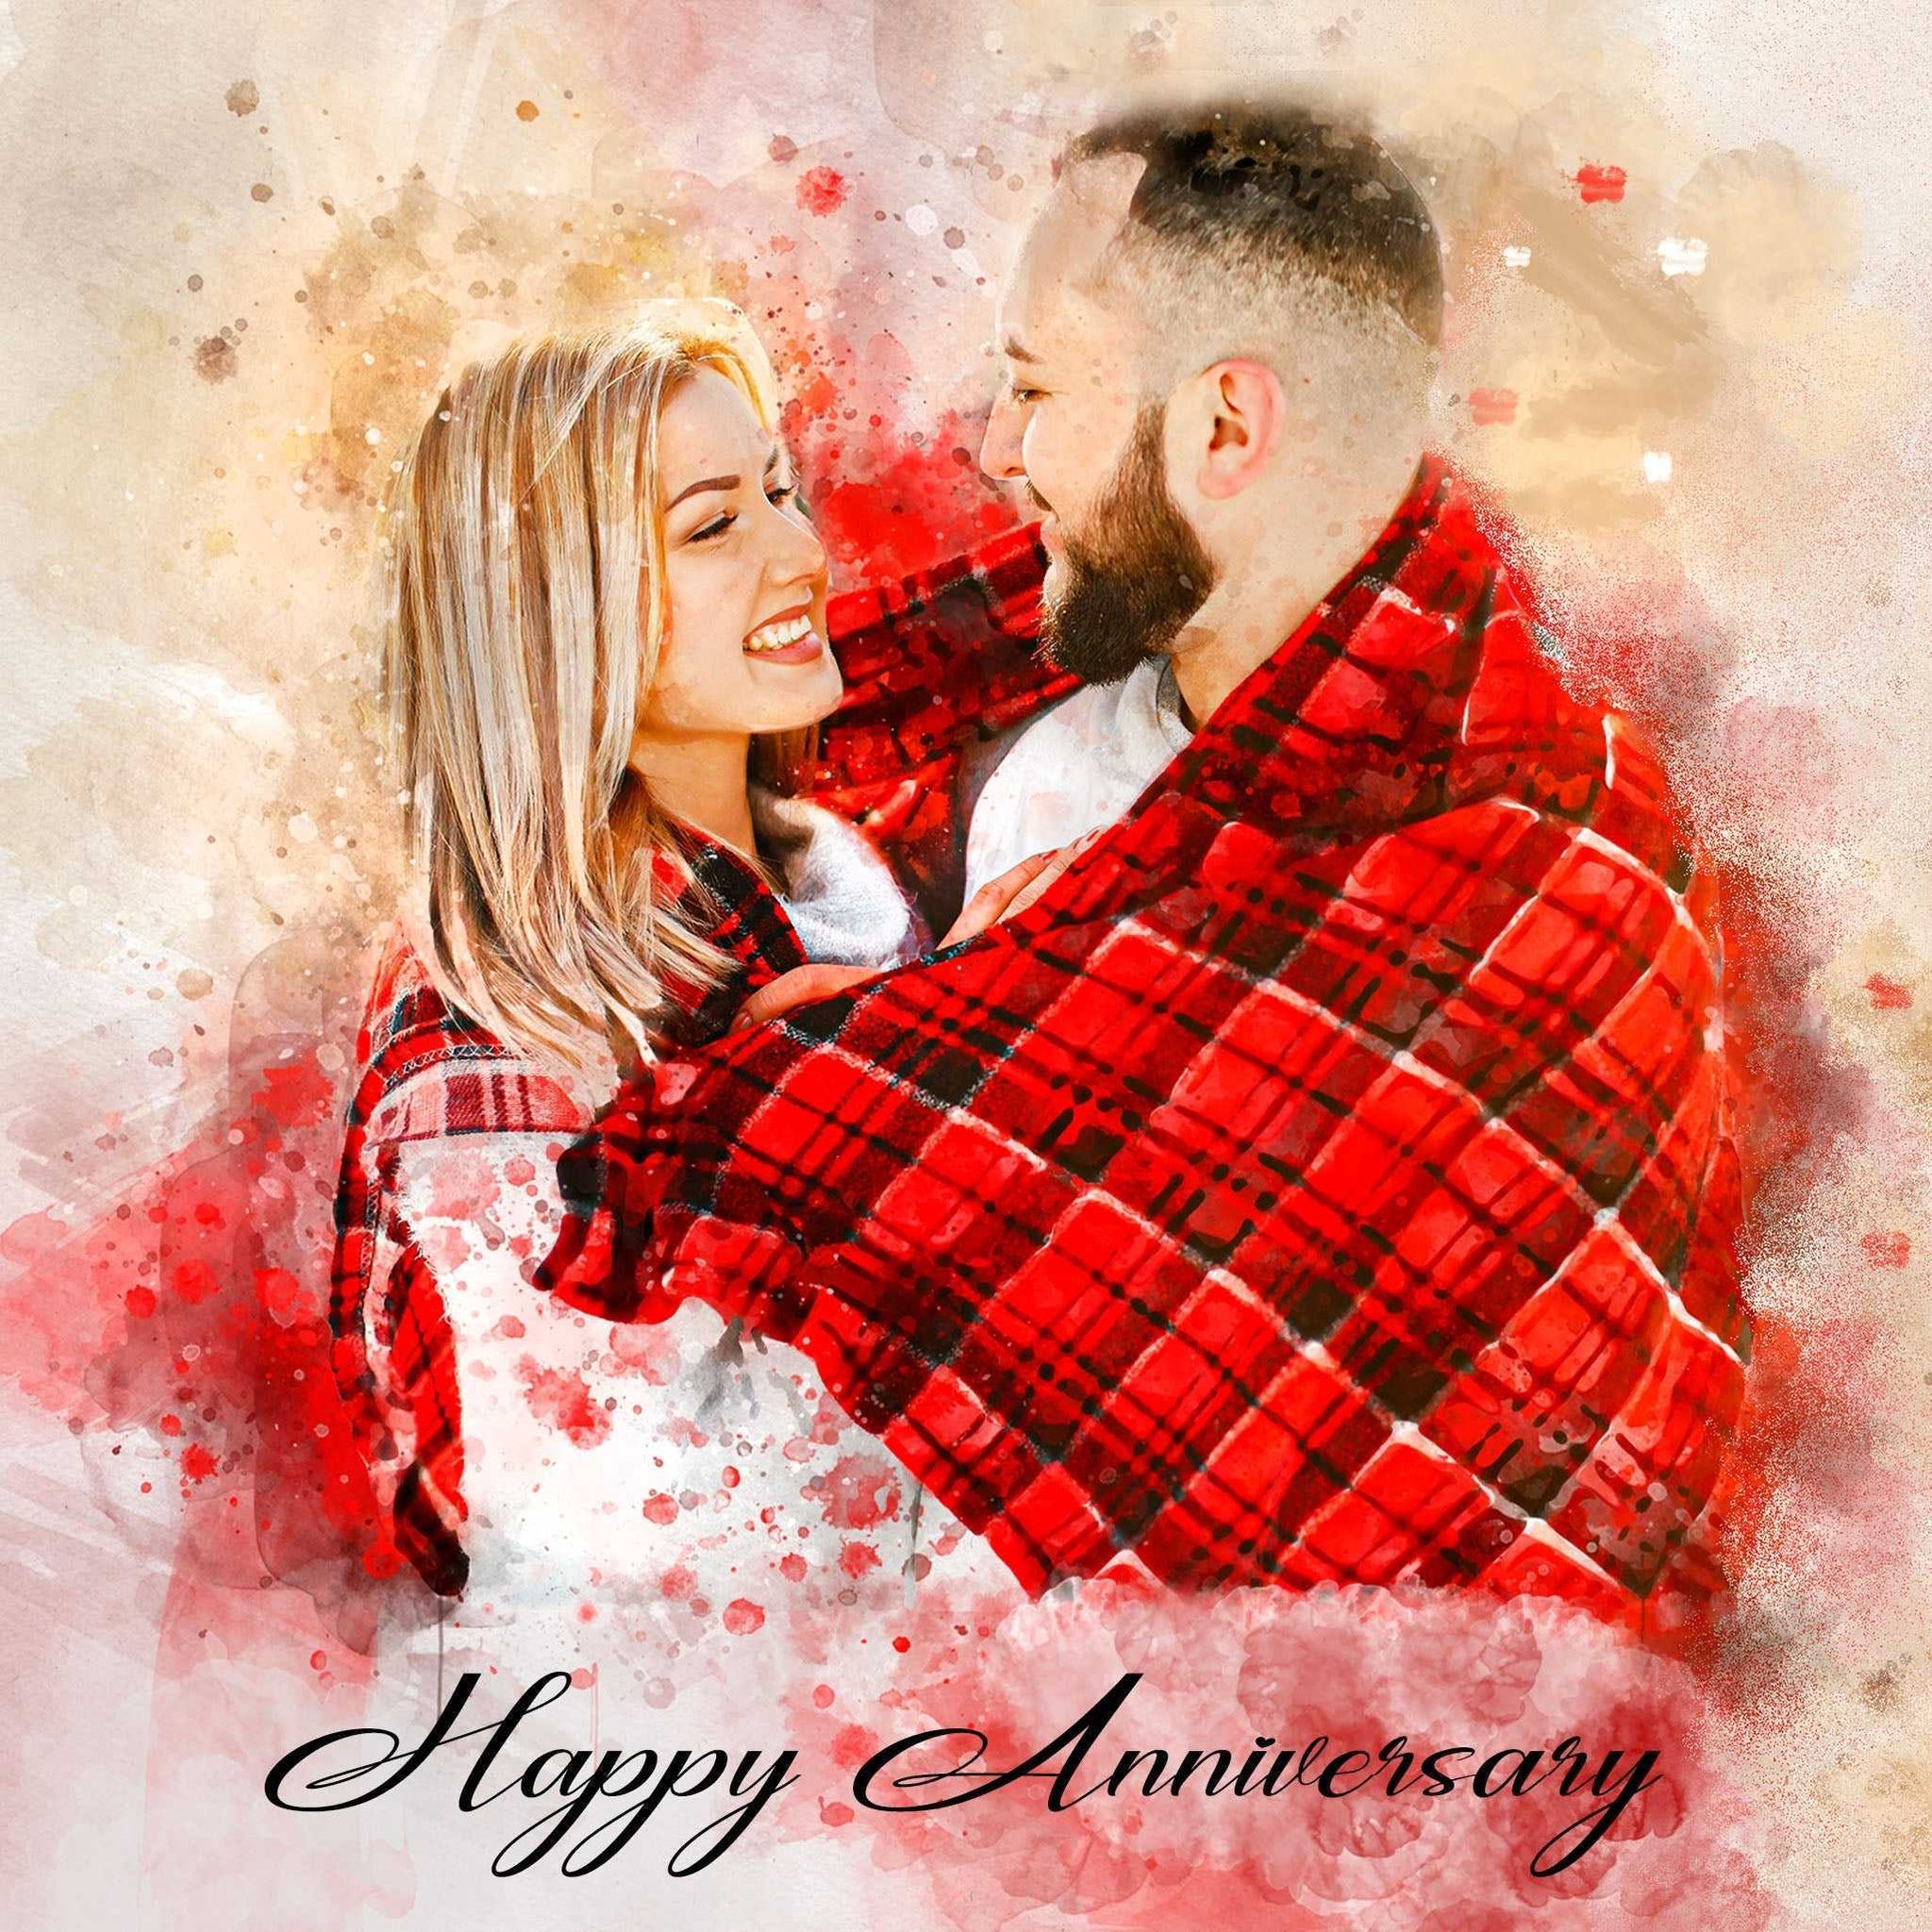 Meaningful Anniversary Gift | Custom Painting from Photo | Romantic Gift Ideas for Her and Him - FromPicToArt